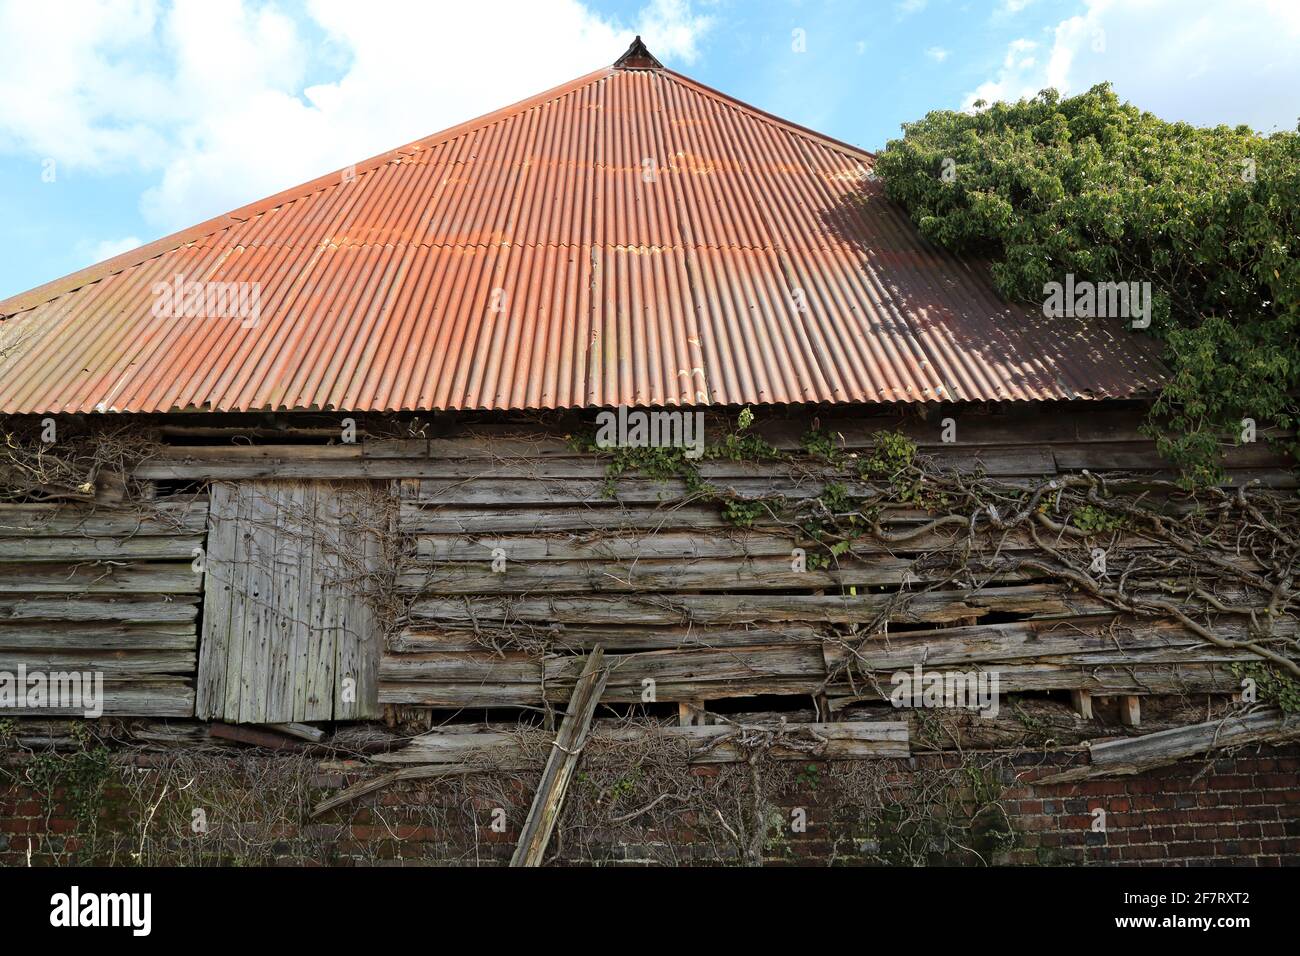 Rustic barn with red tin roof and ivy climbing the wooden walls in the village of Stowting on the edge of the North Downs, Stowting Hill, Stowting, Ke Stock Photo